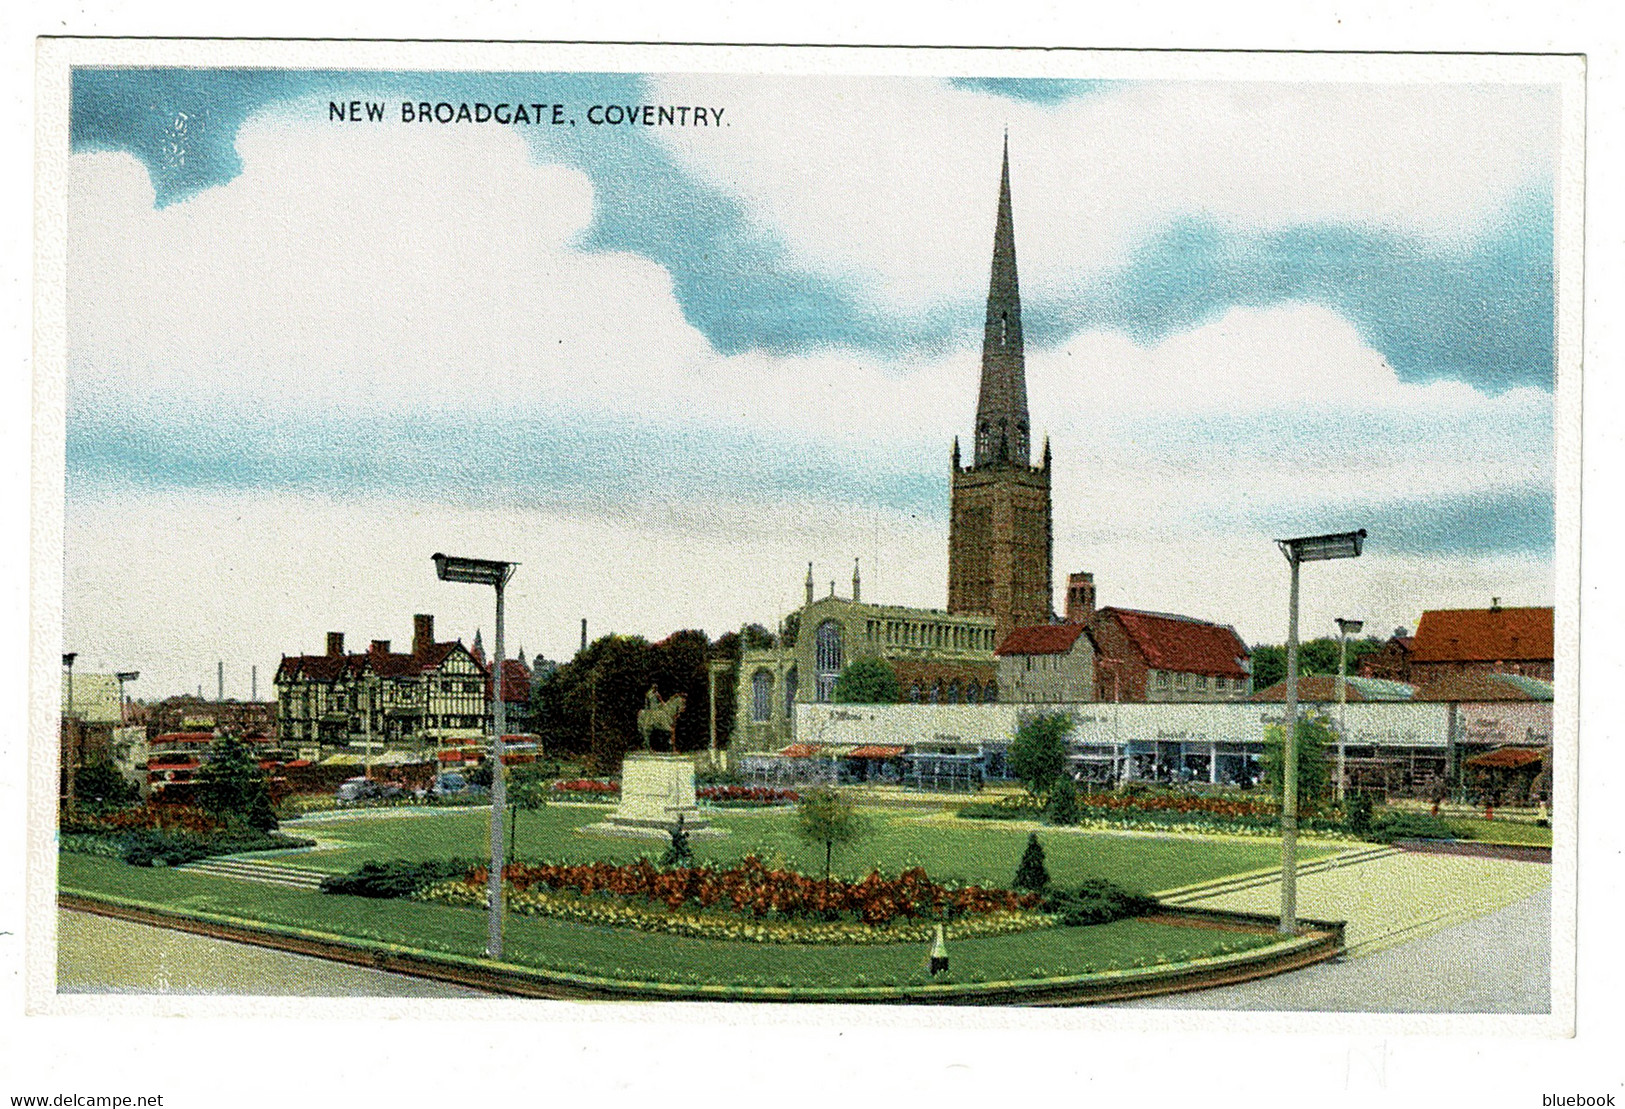 Ref 1404 - 2 X Postcards - New Broadgate & Broadgate House - Coventry Warwickshire - Coventry